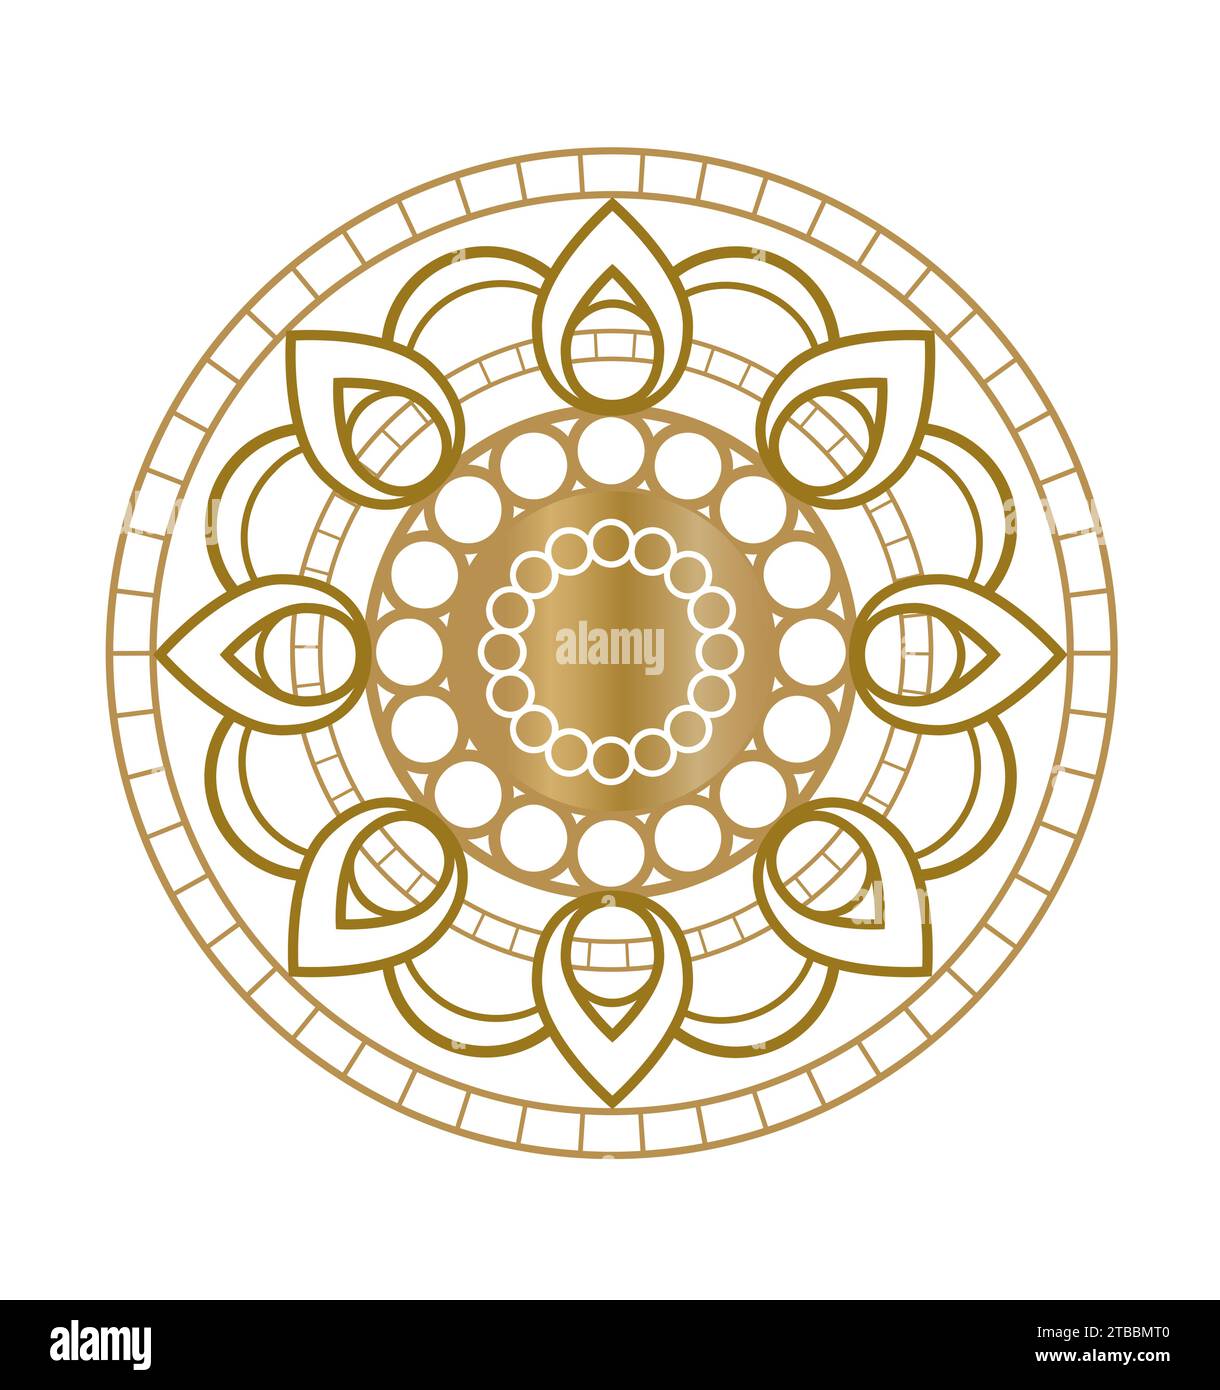 Golden mandala emblem with circles in the middle Stock Vector